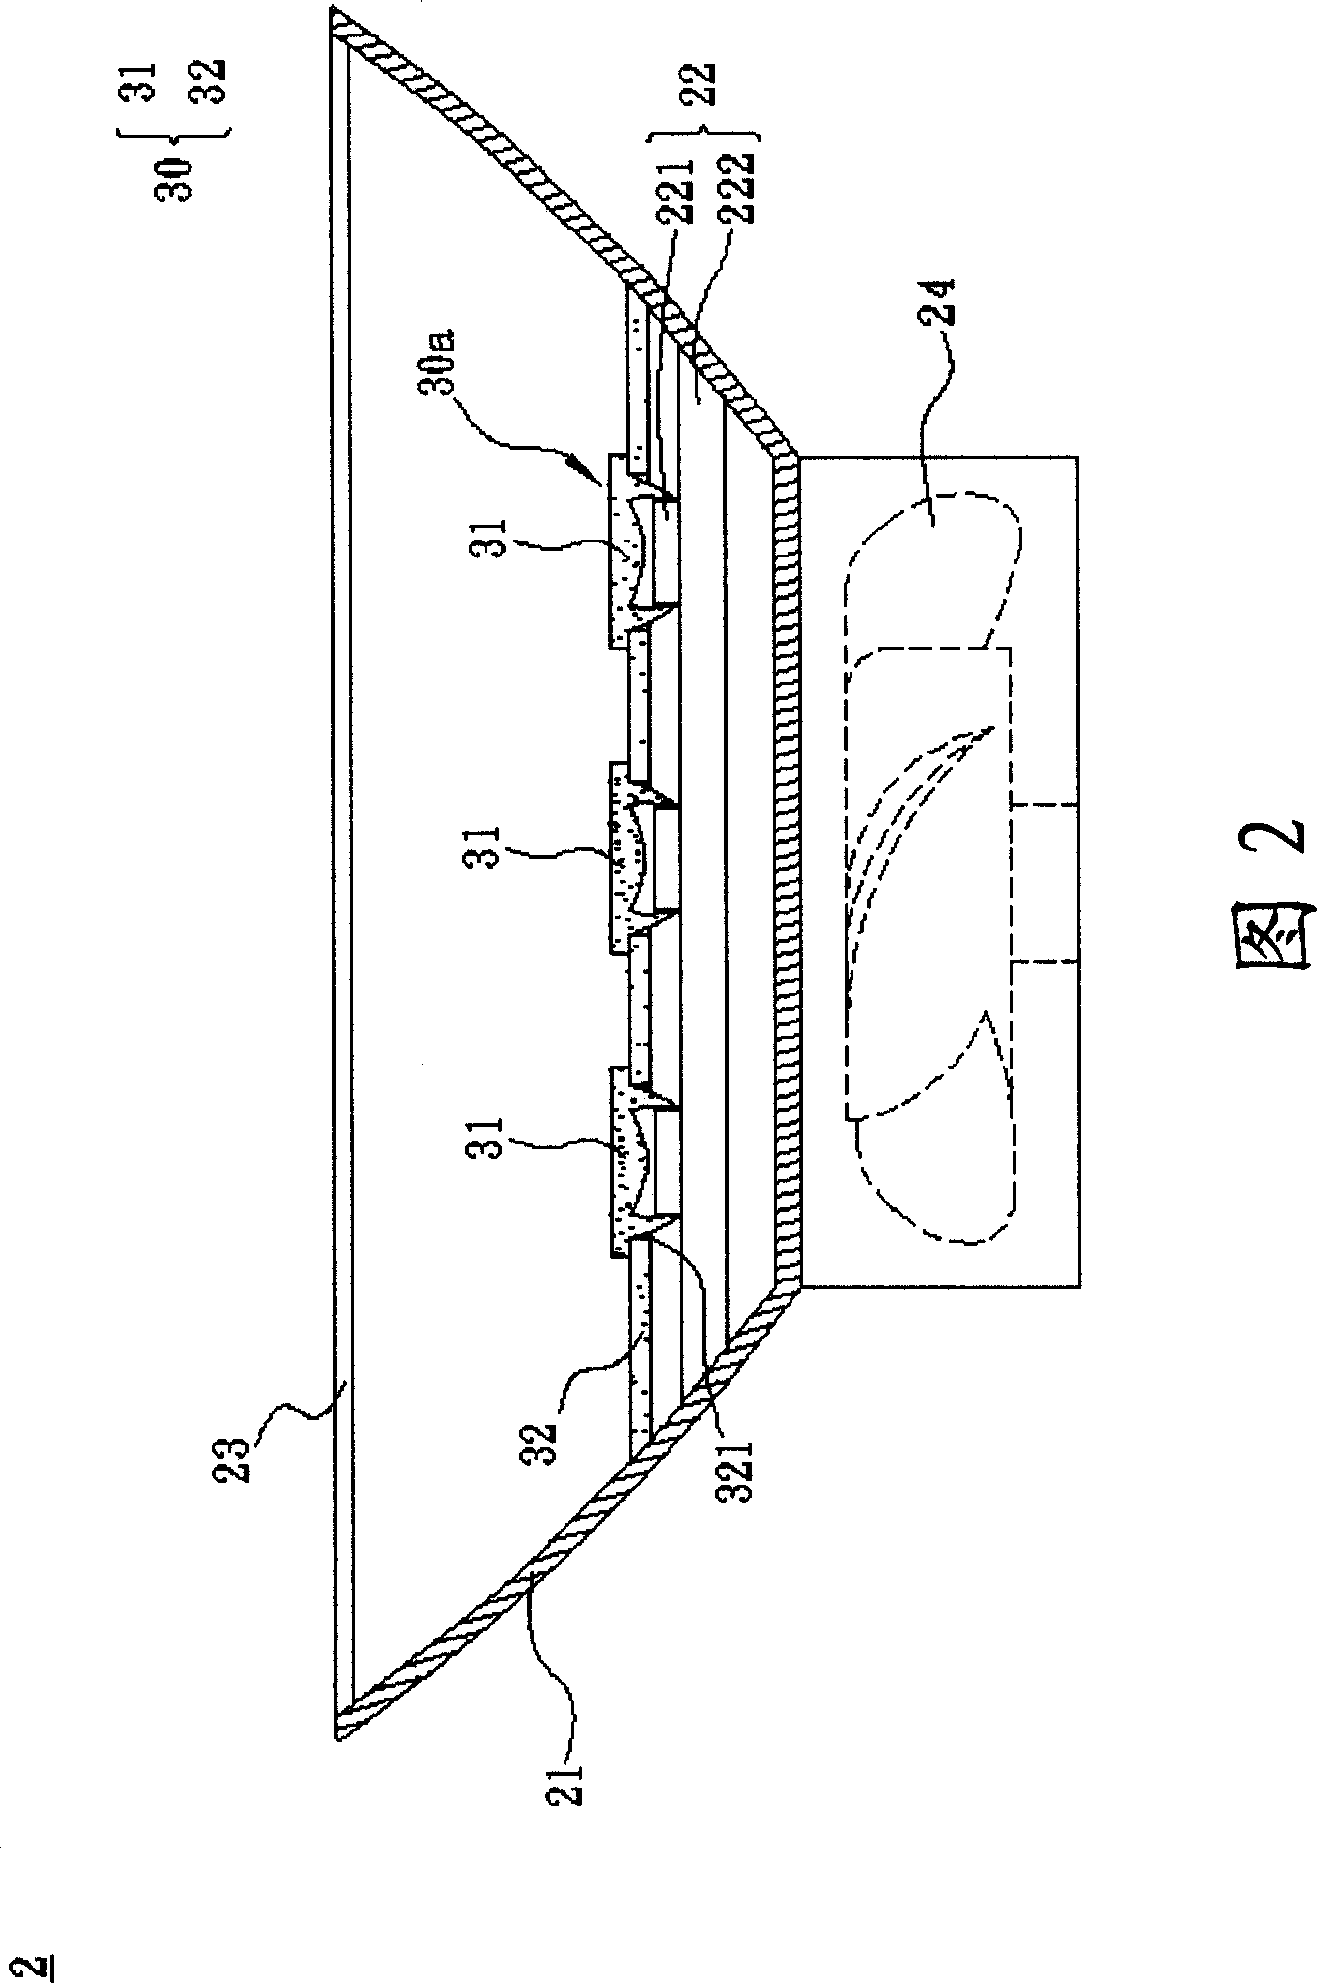 Lighting device and light-gathering plate thereof